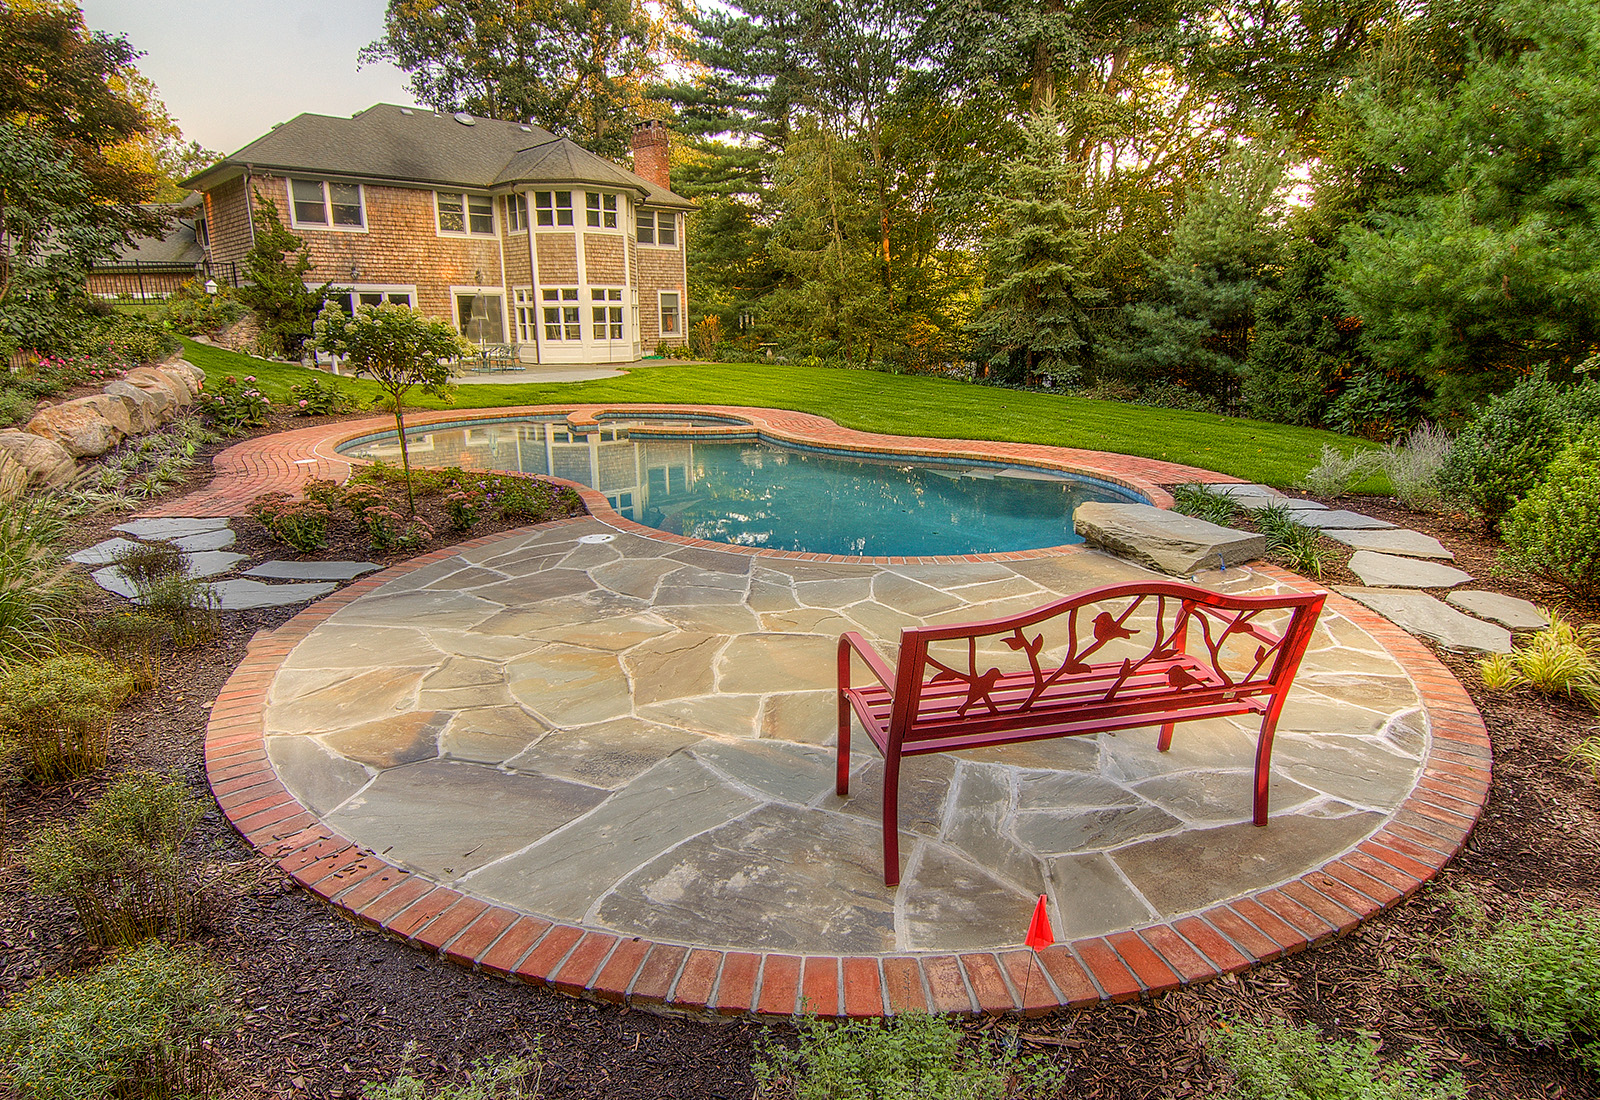 Secluded gunite pool and spa surrounded by a bluestone patio with brick coping.